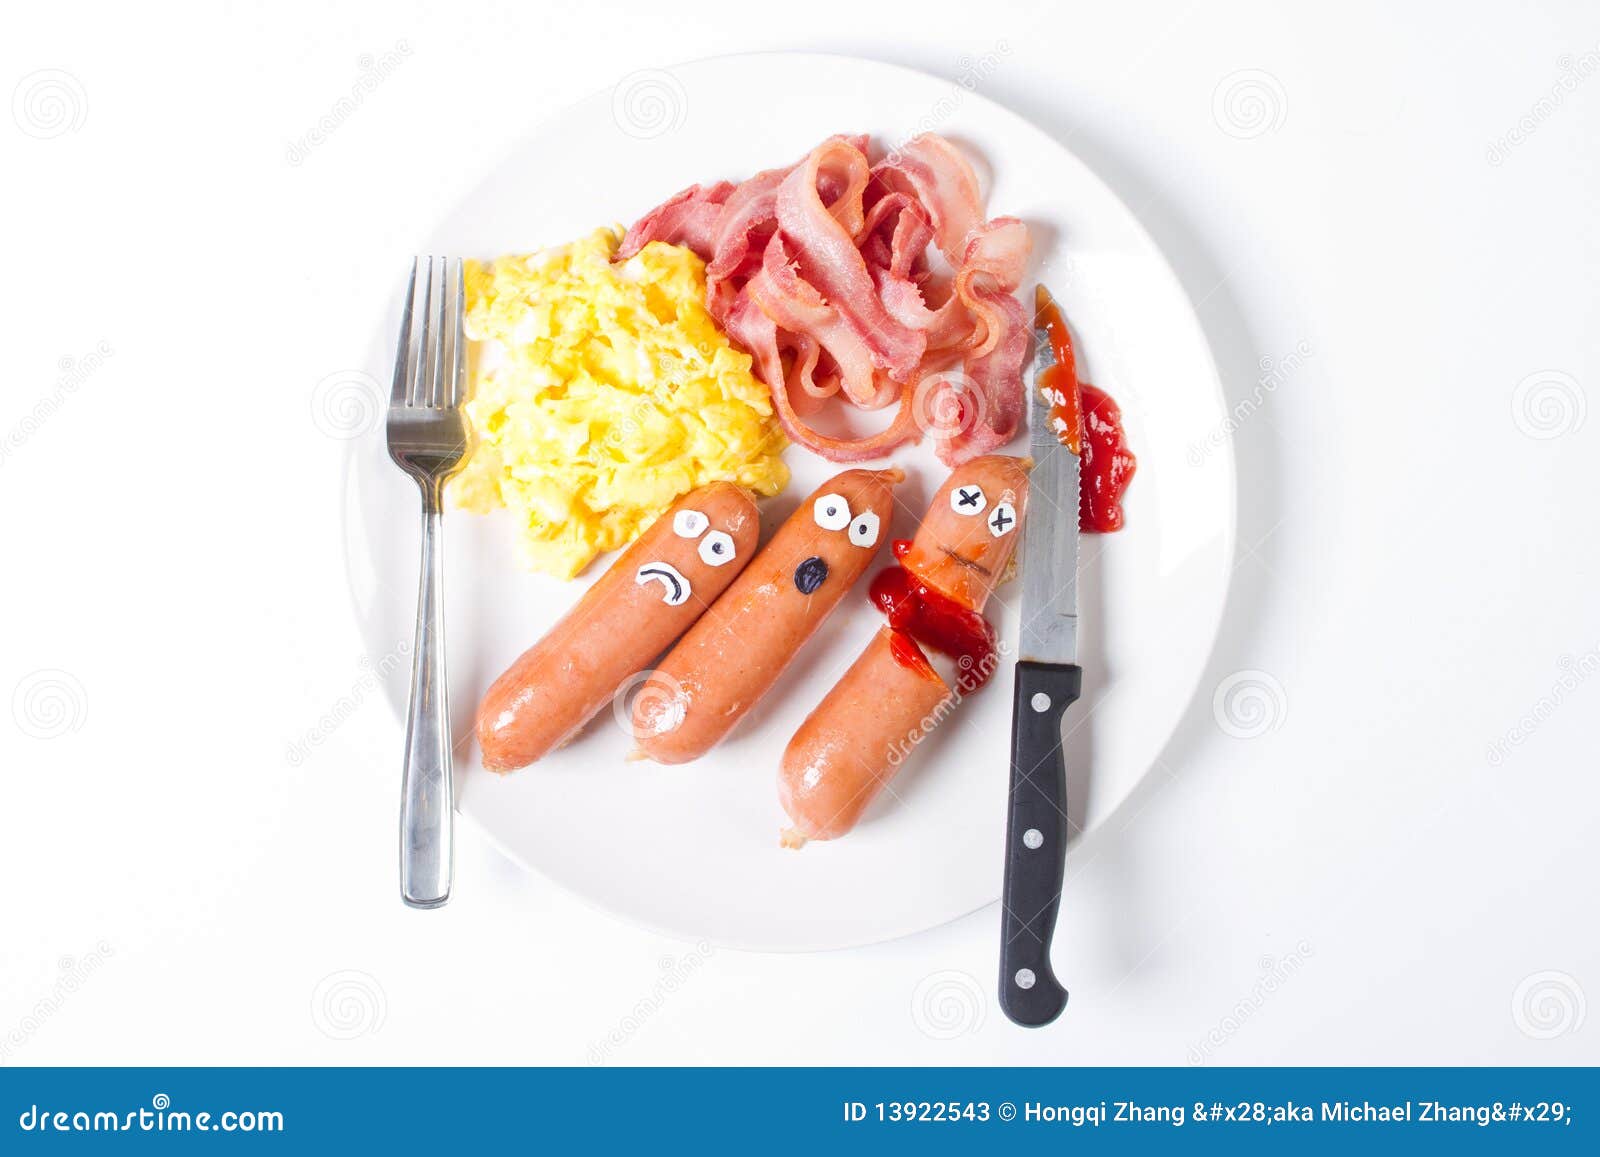 Funny junk food stock image. Image of health, food, healthy - 13922543